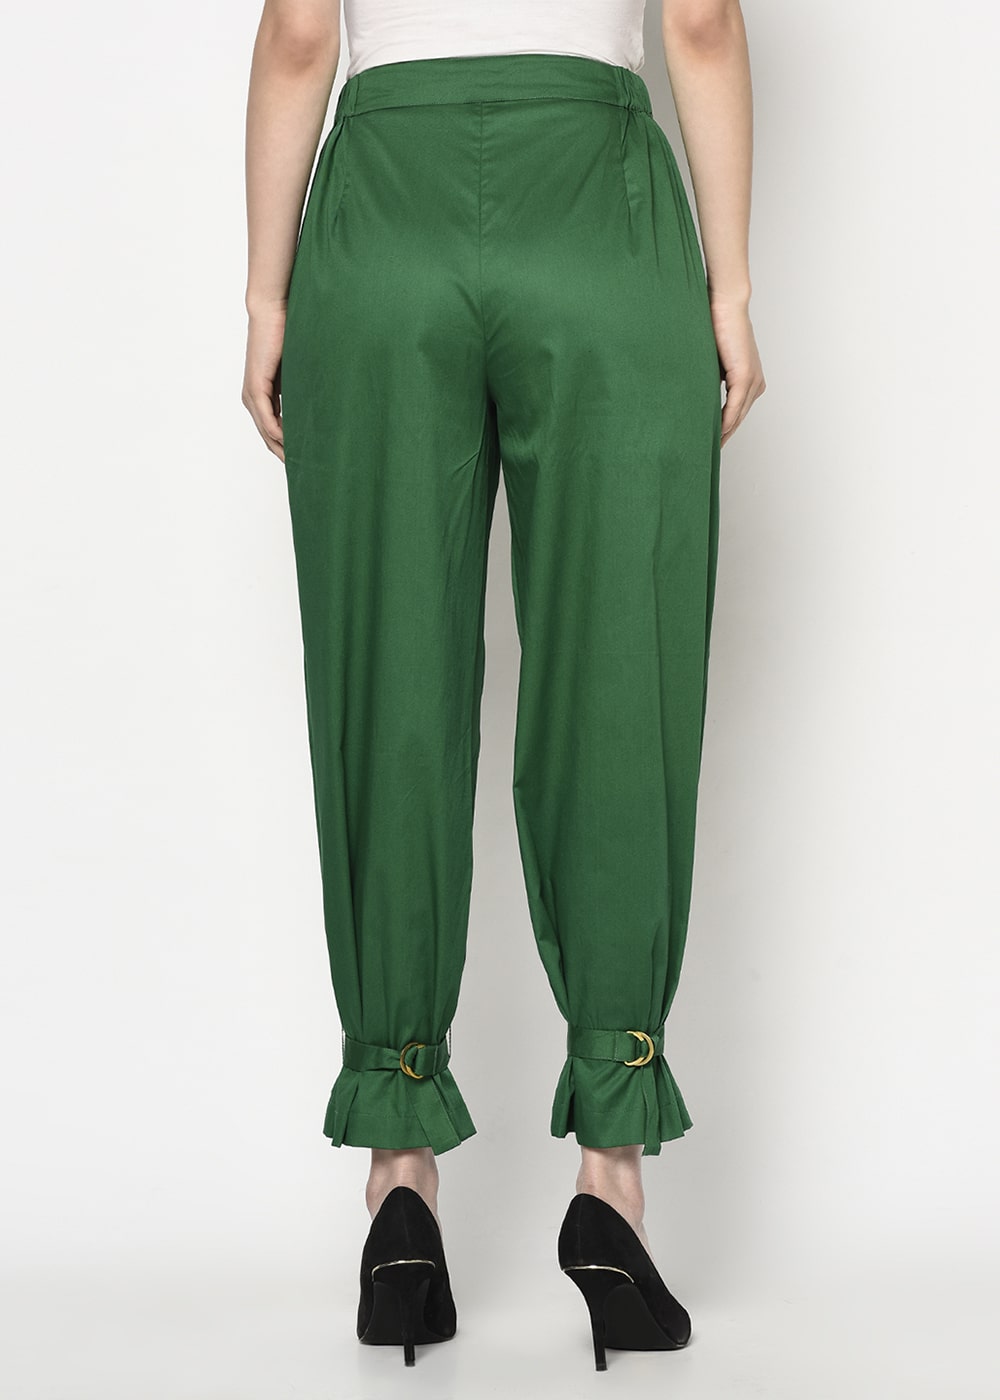 Green Trouser With D-Ring Tie